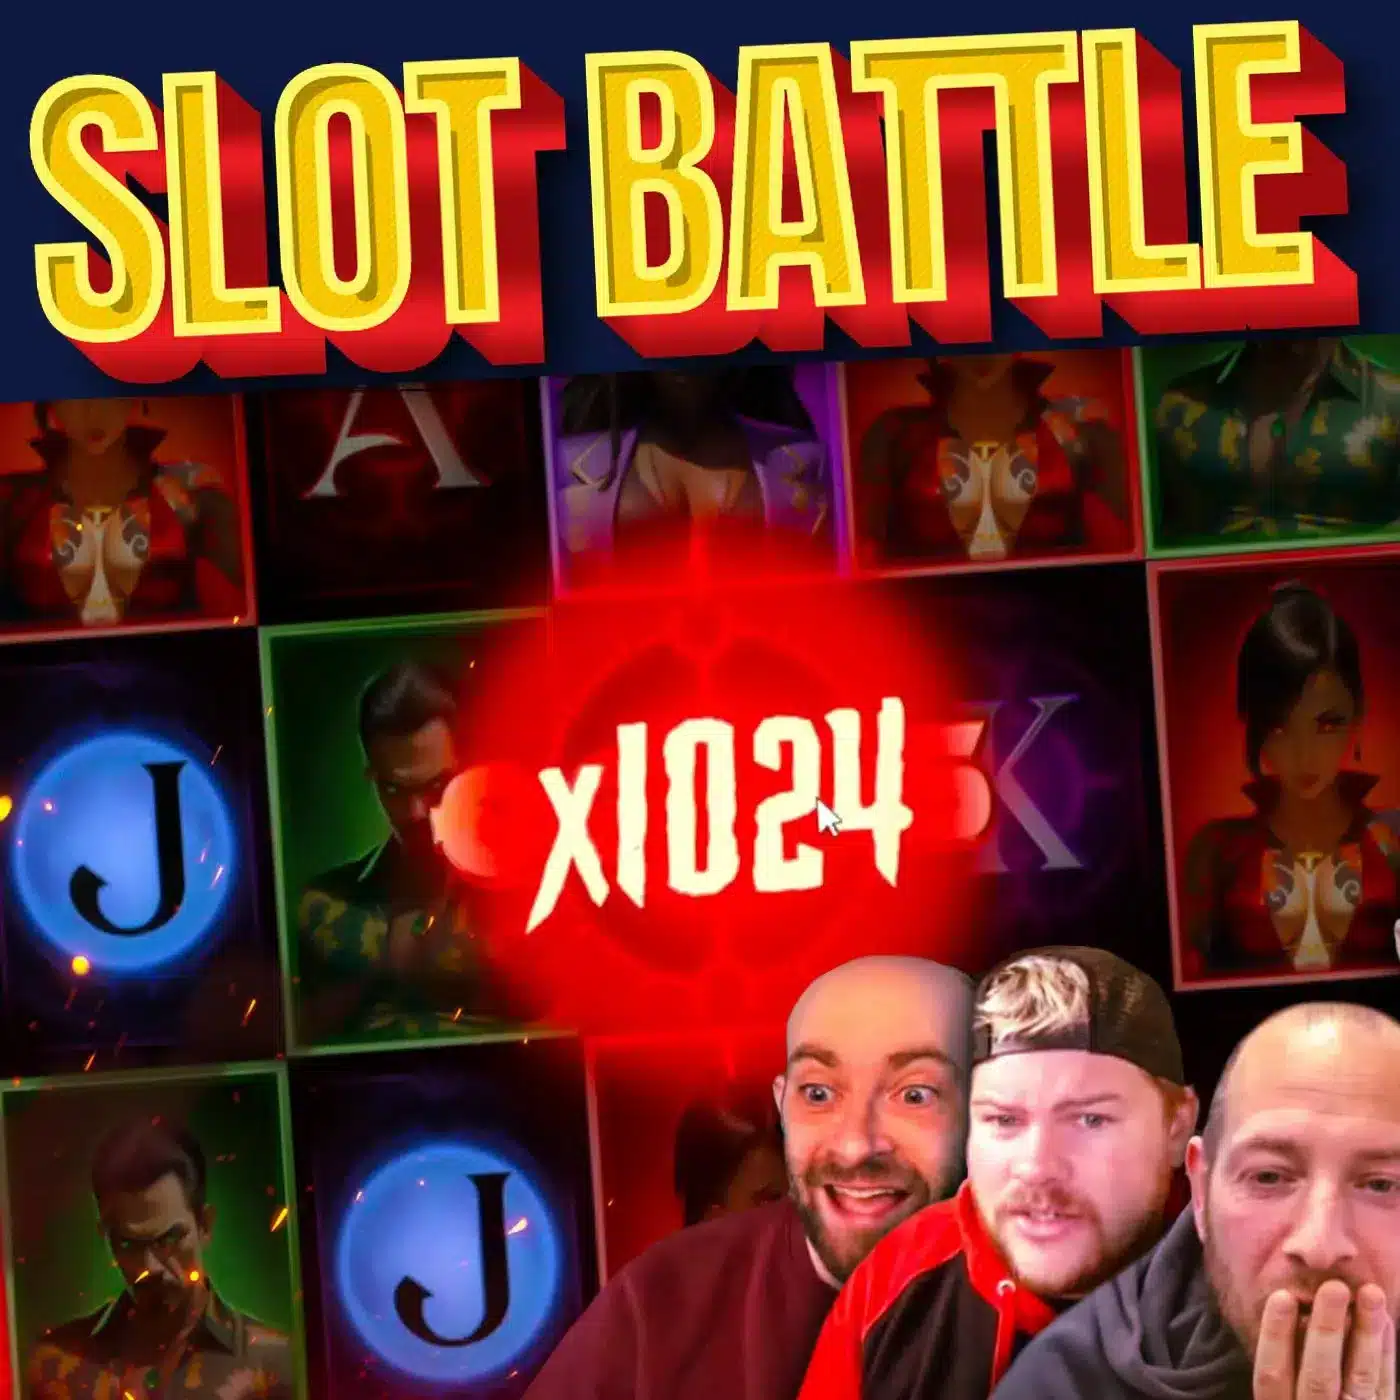 Slot Battle Sunday New Slots Special Space Donkey Benny The Beer And More Jpg